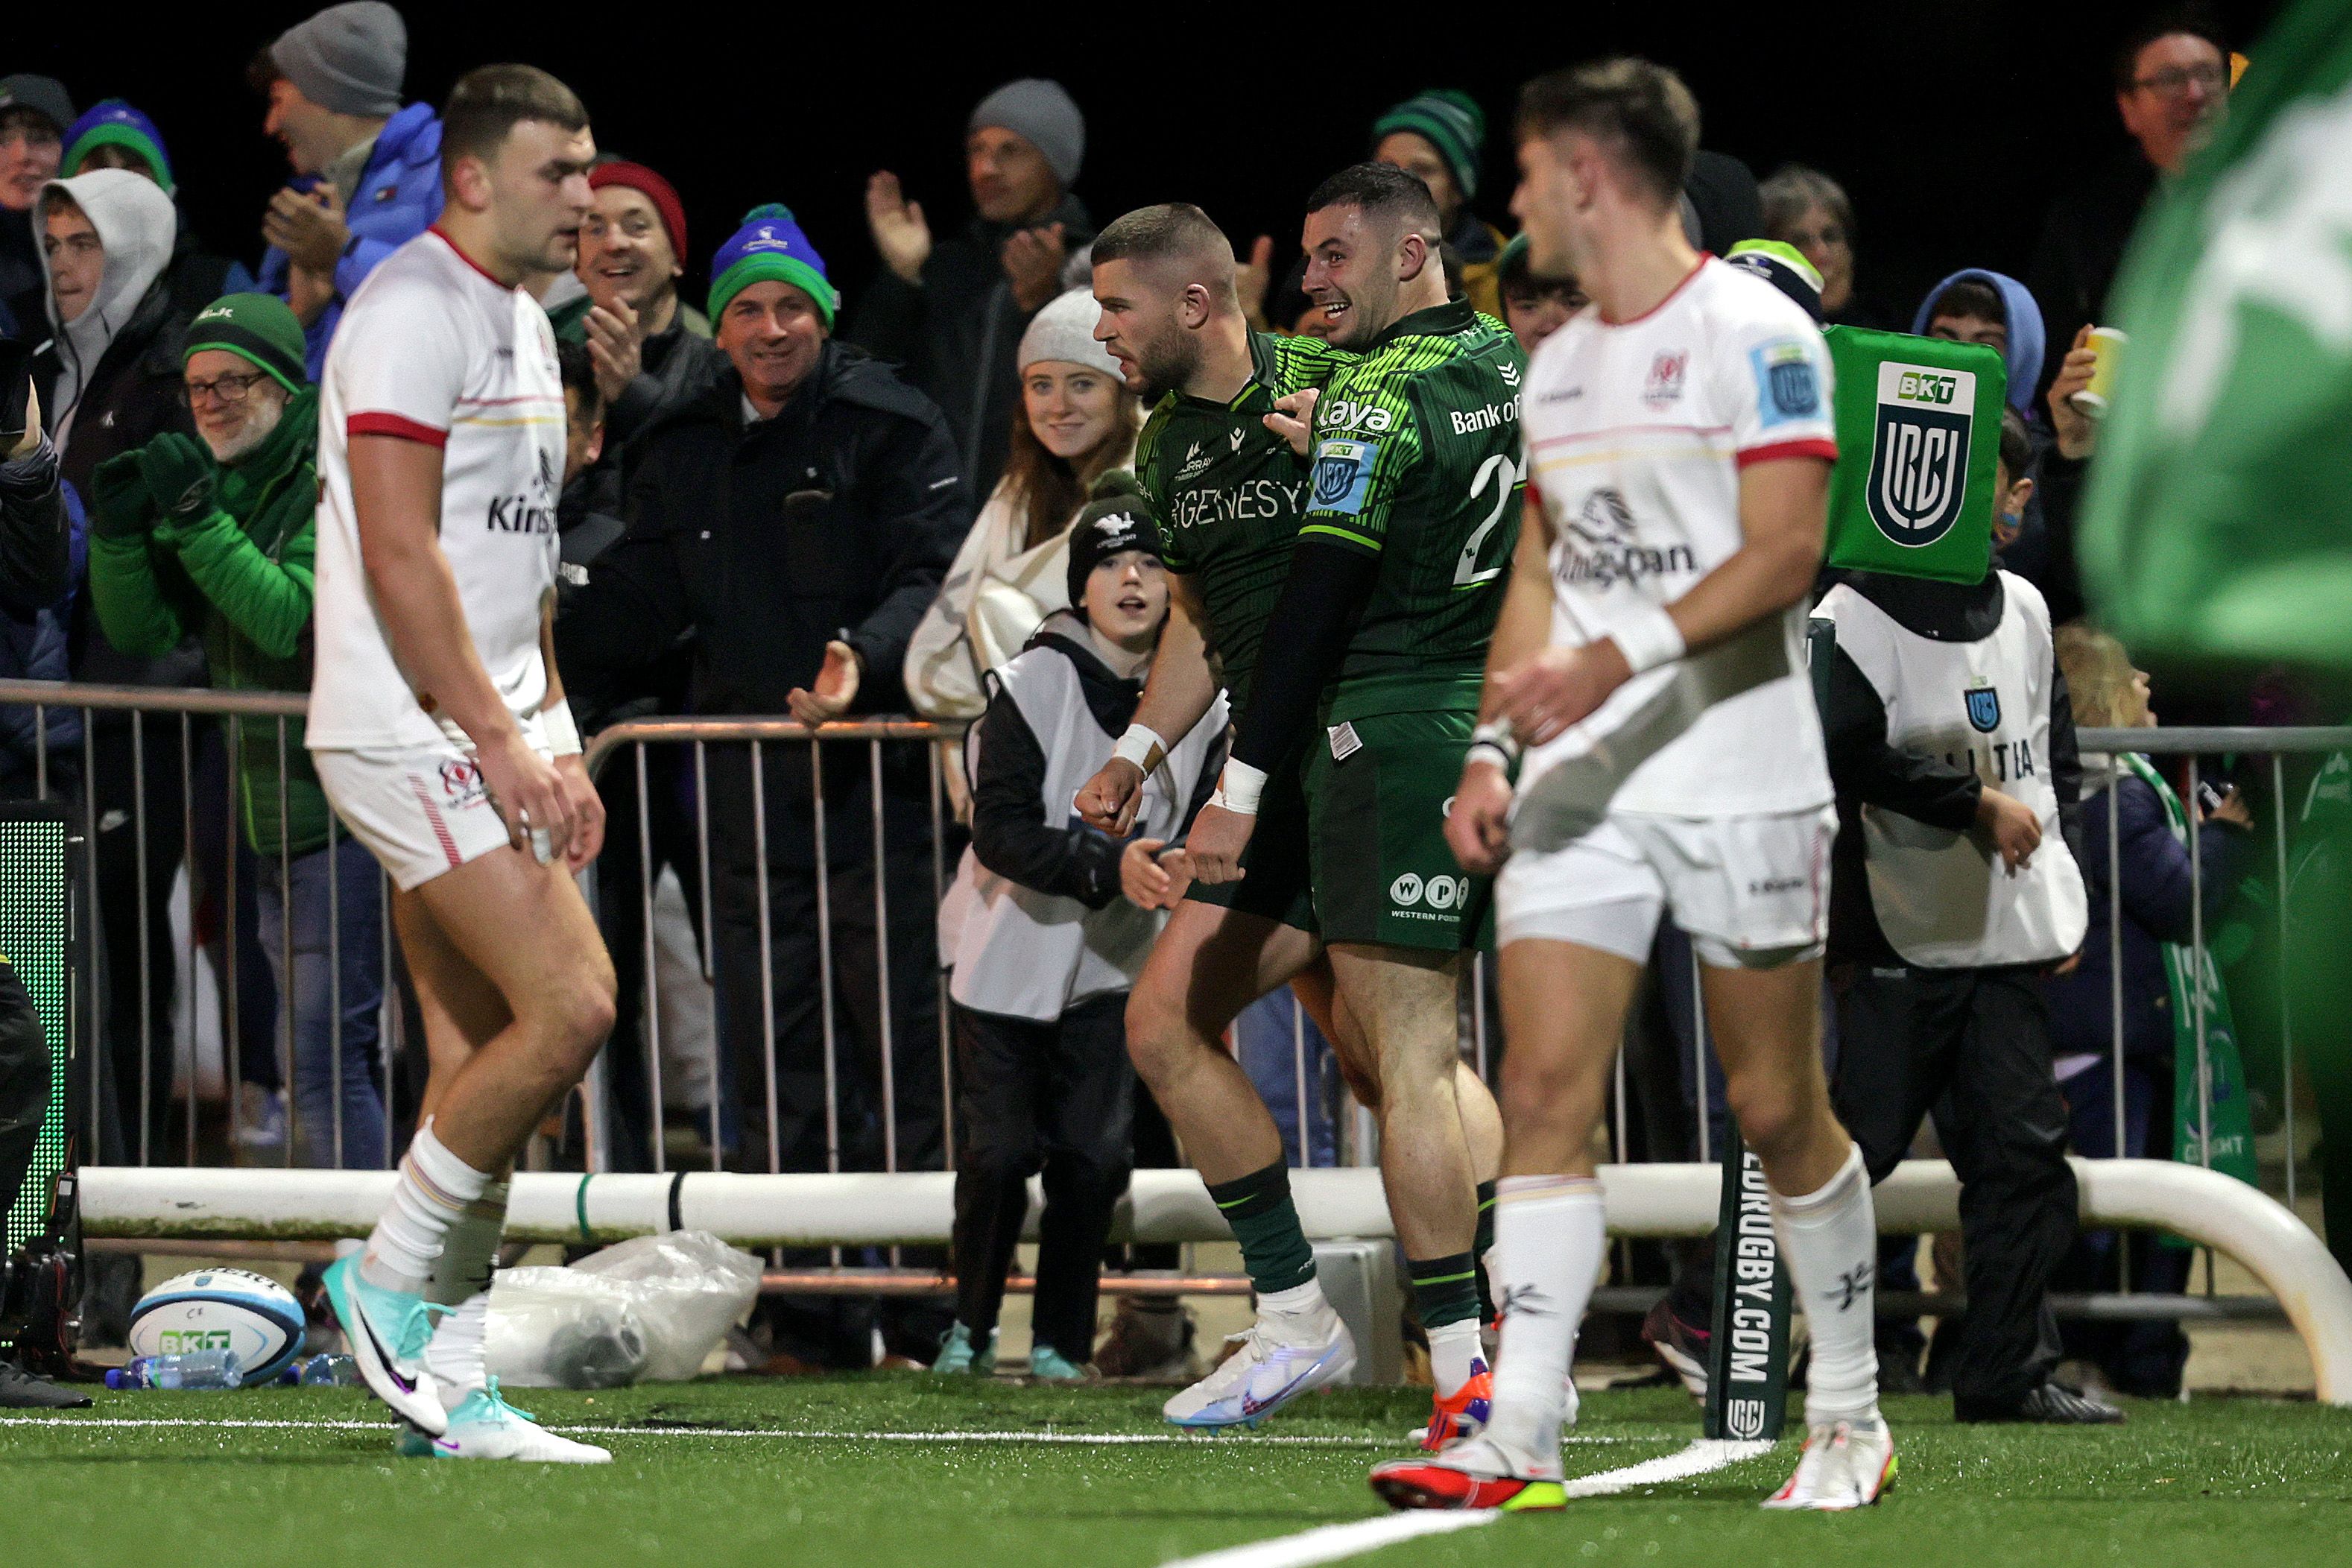 Ulster were pipped at the post by Connacht last week but will hope to bounce back in another inter-pro derby against Munster 